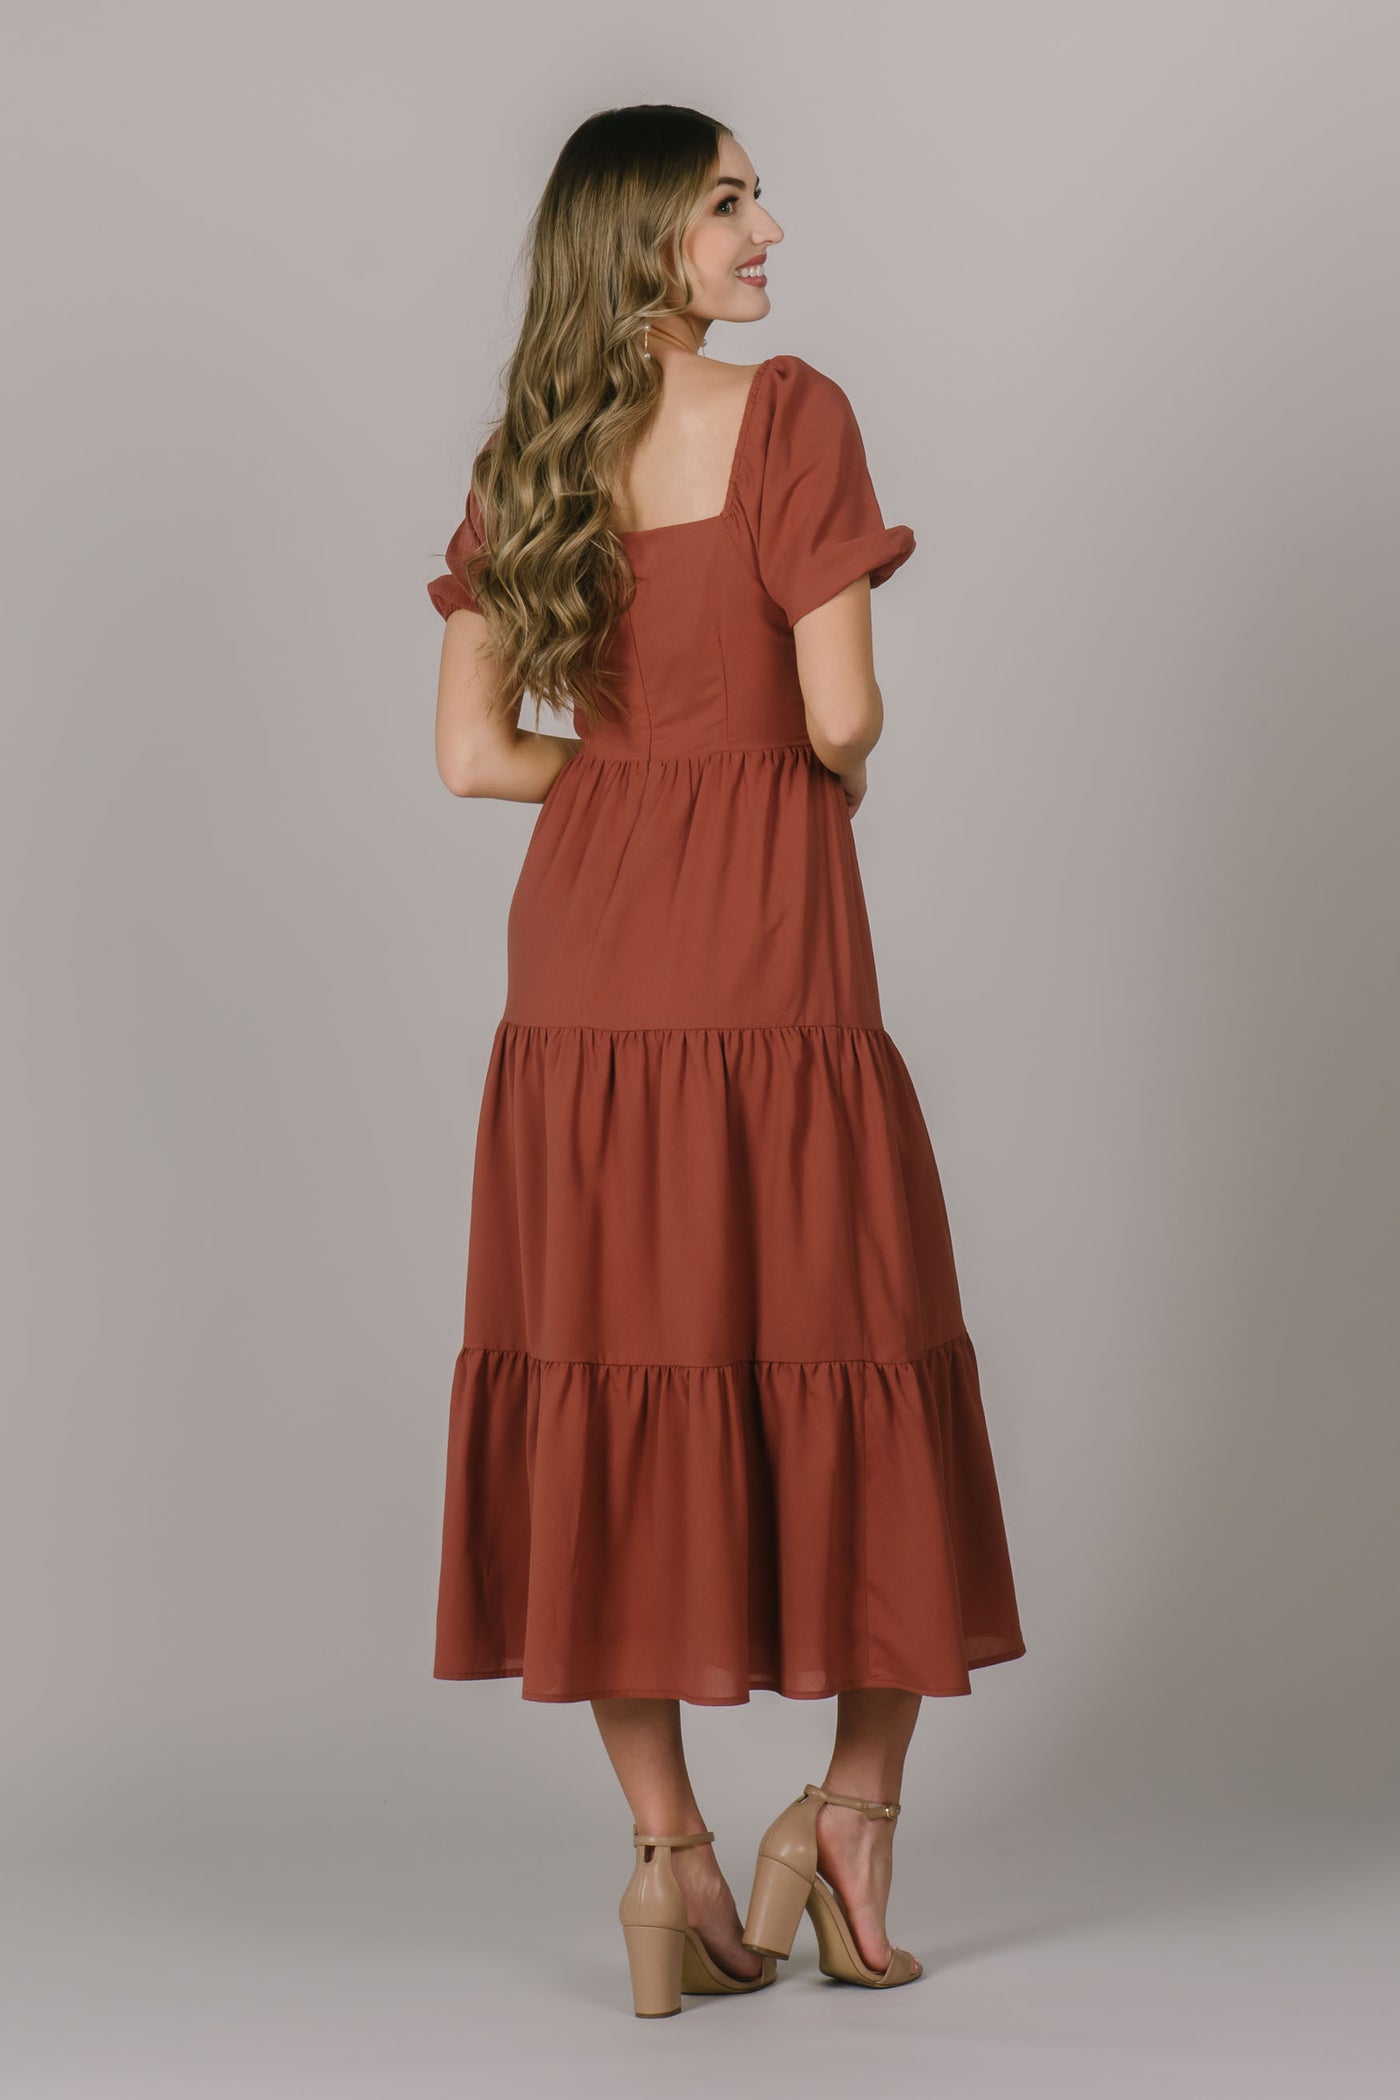 The back of a modest dress in a rust color with a square back neckline, puff sleeves, and tiers.